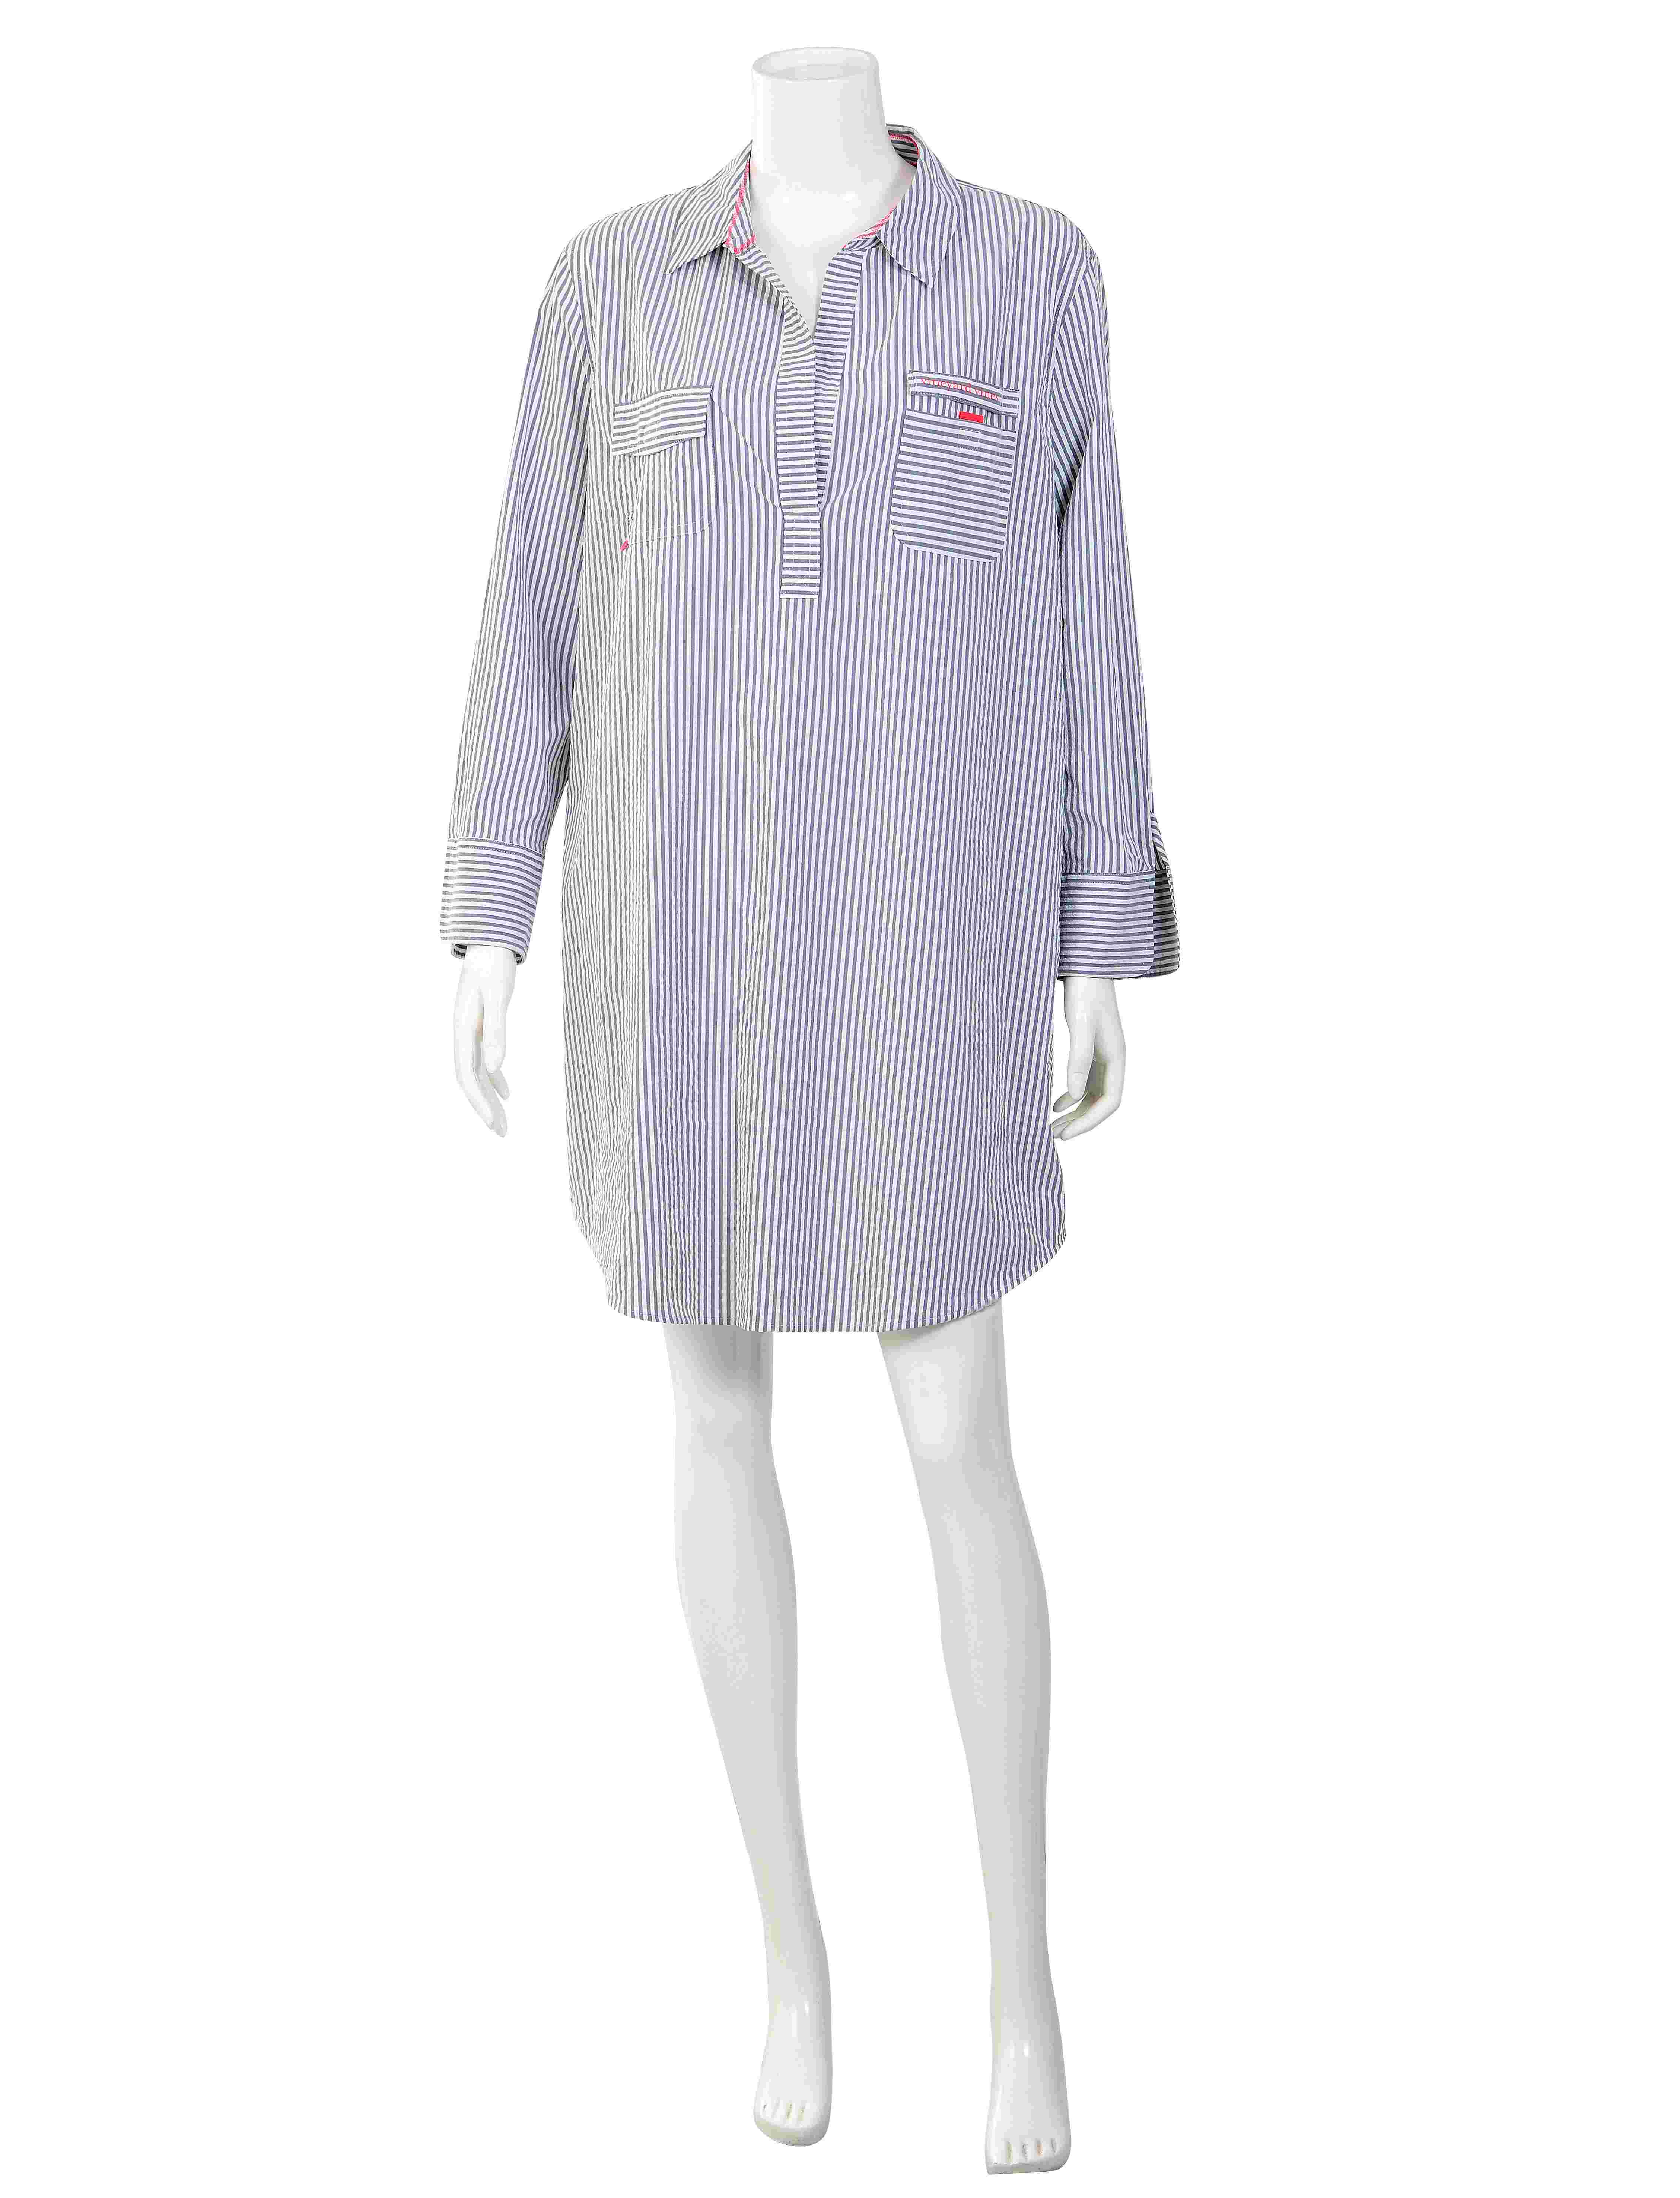 Ladies Long Sleeve Striped Casual Woven Shirt Dress